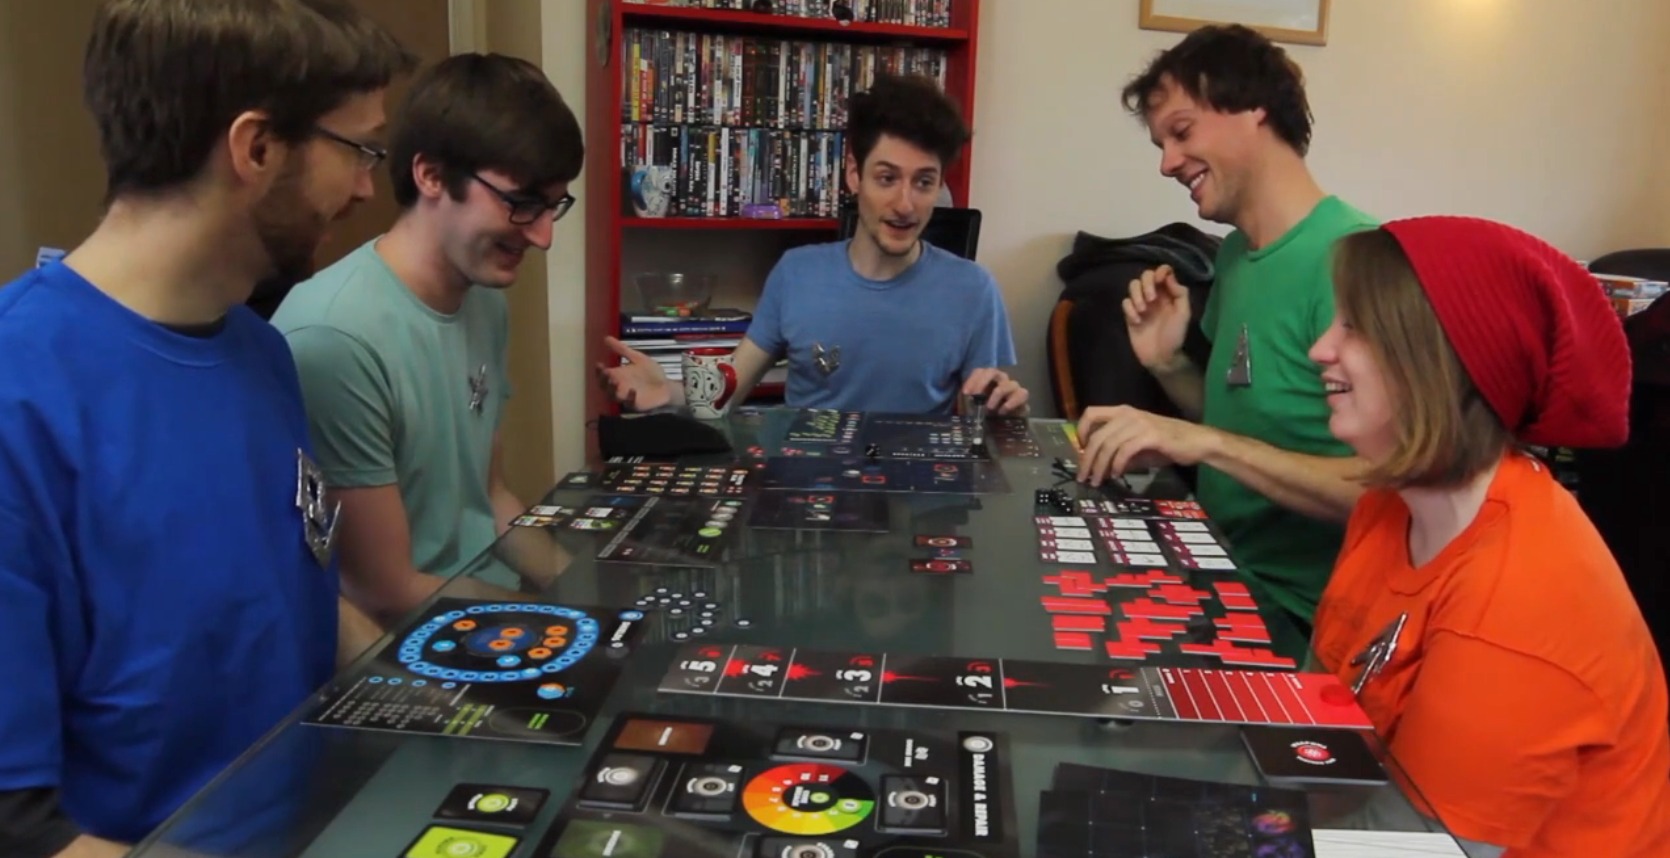 An Actual Interview: Space Cadets